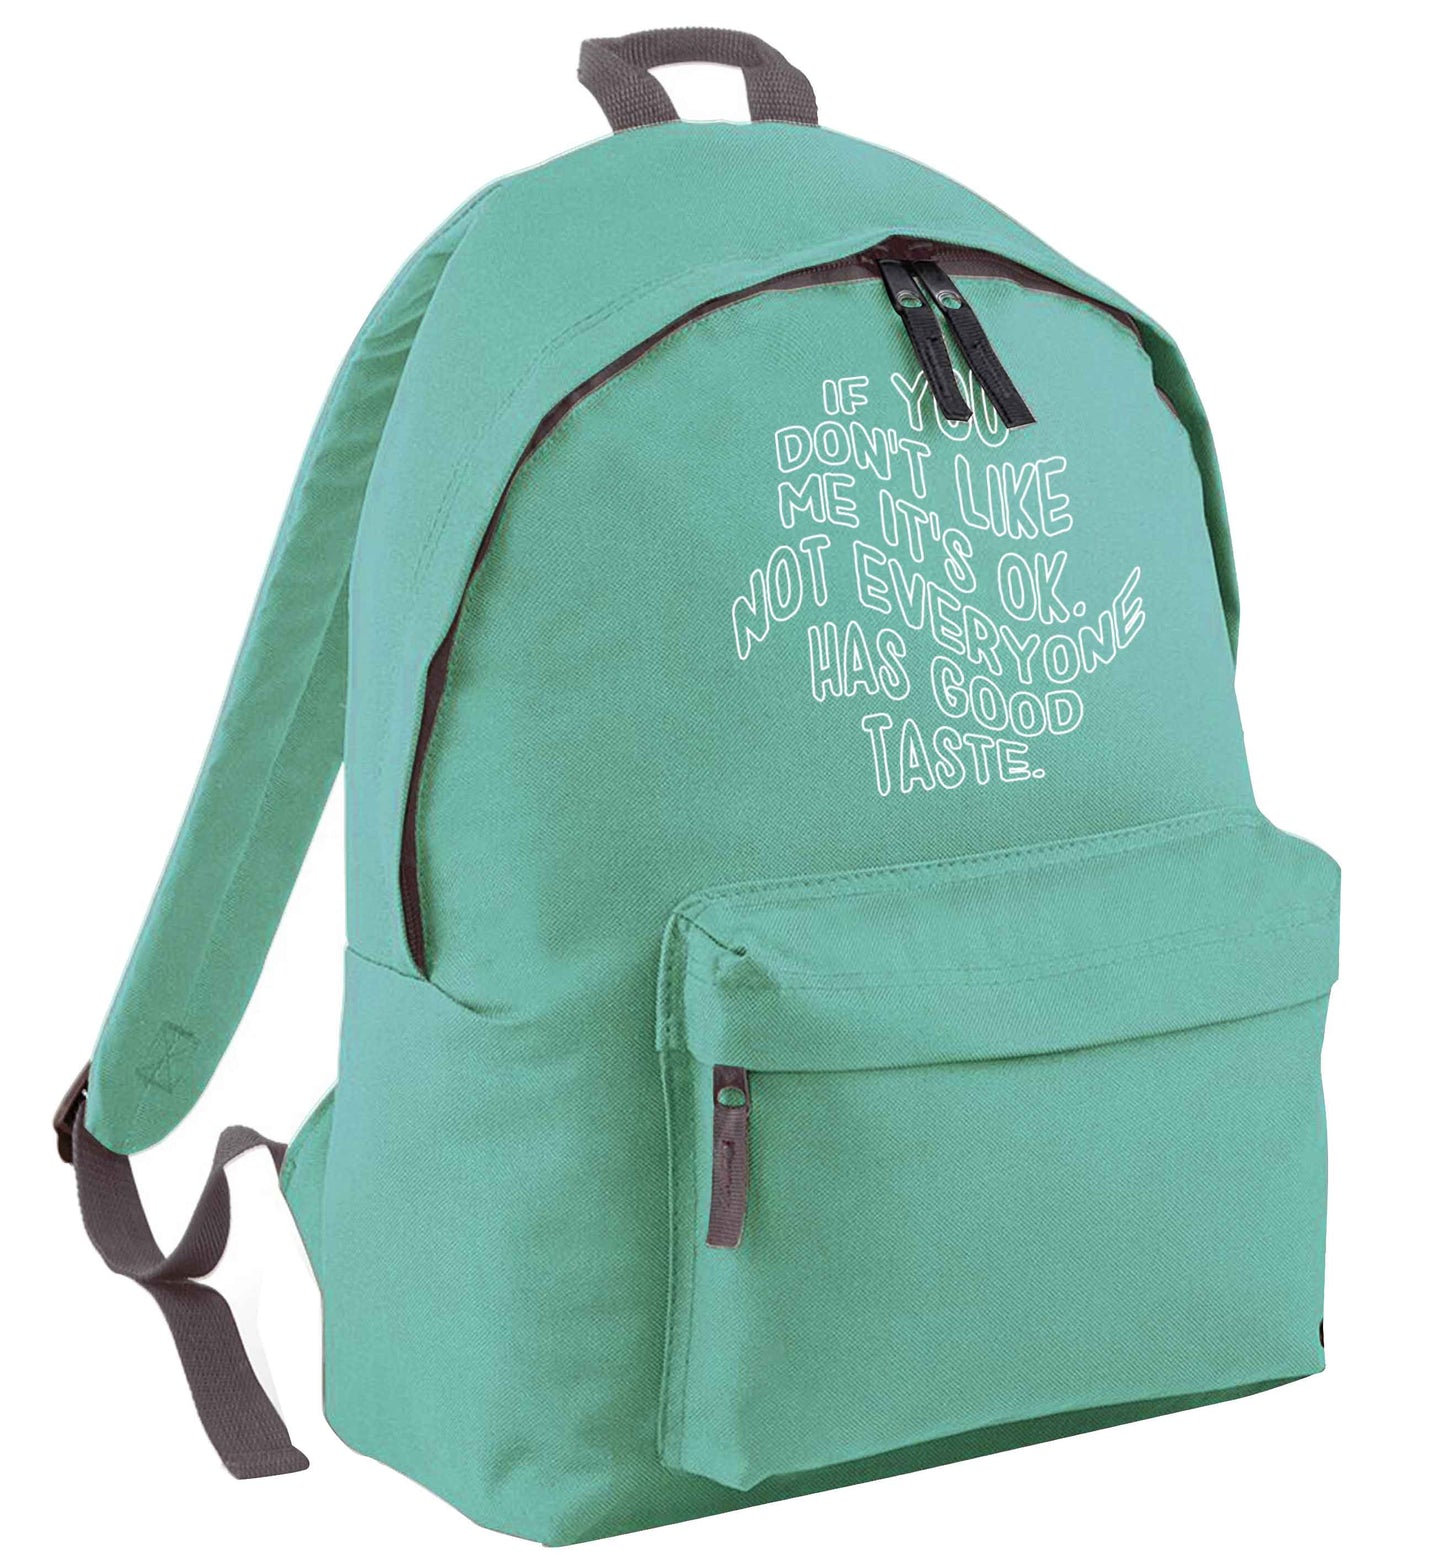 If you don't like me it's ok not everyone has good taste mint adults backpack